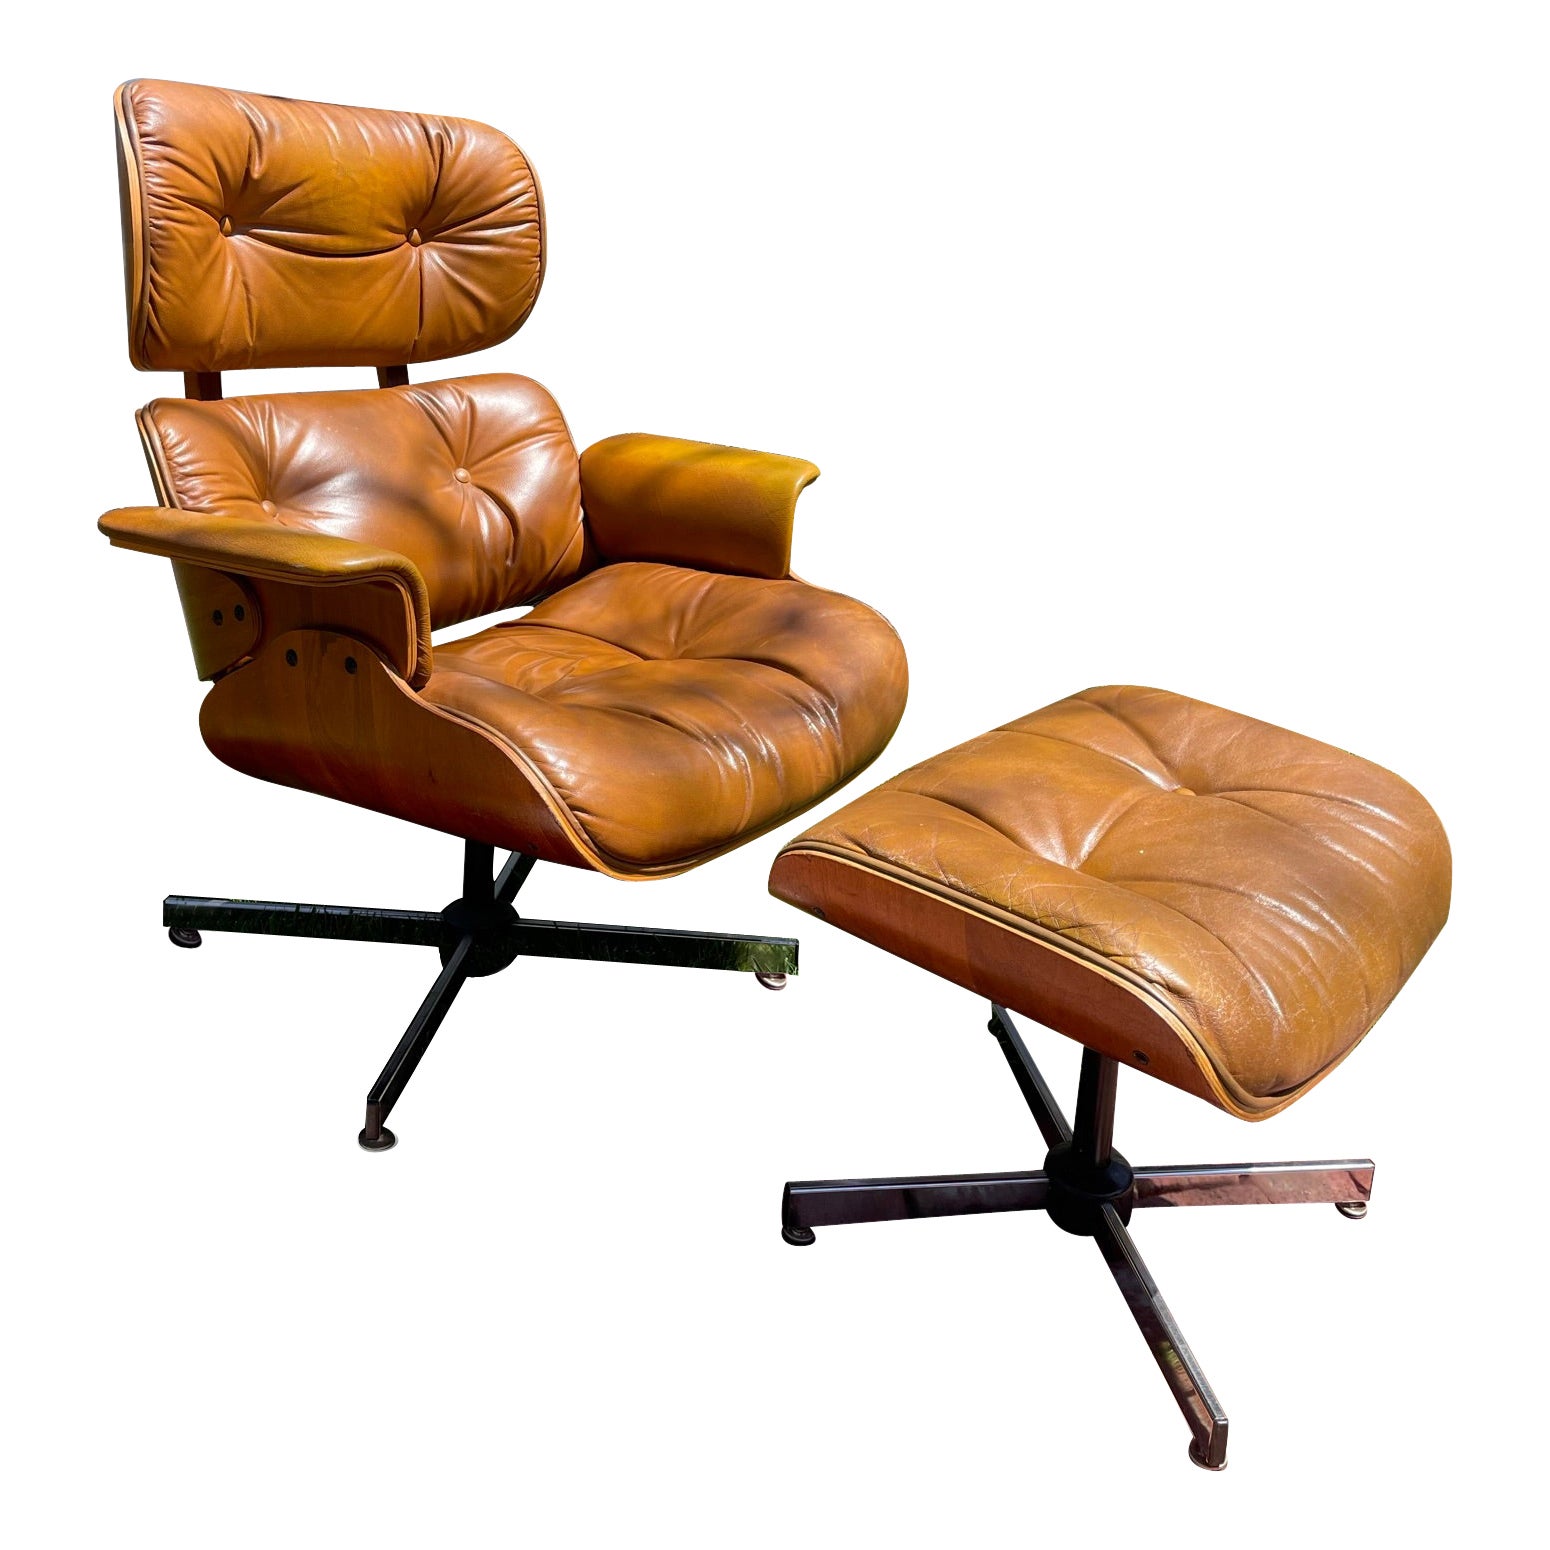 Vintage Eames Style Lounge Chair and Ottoman